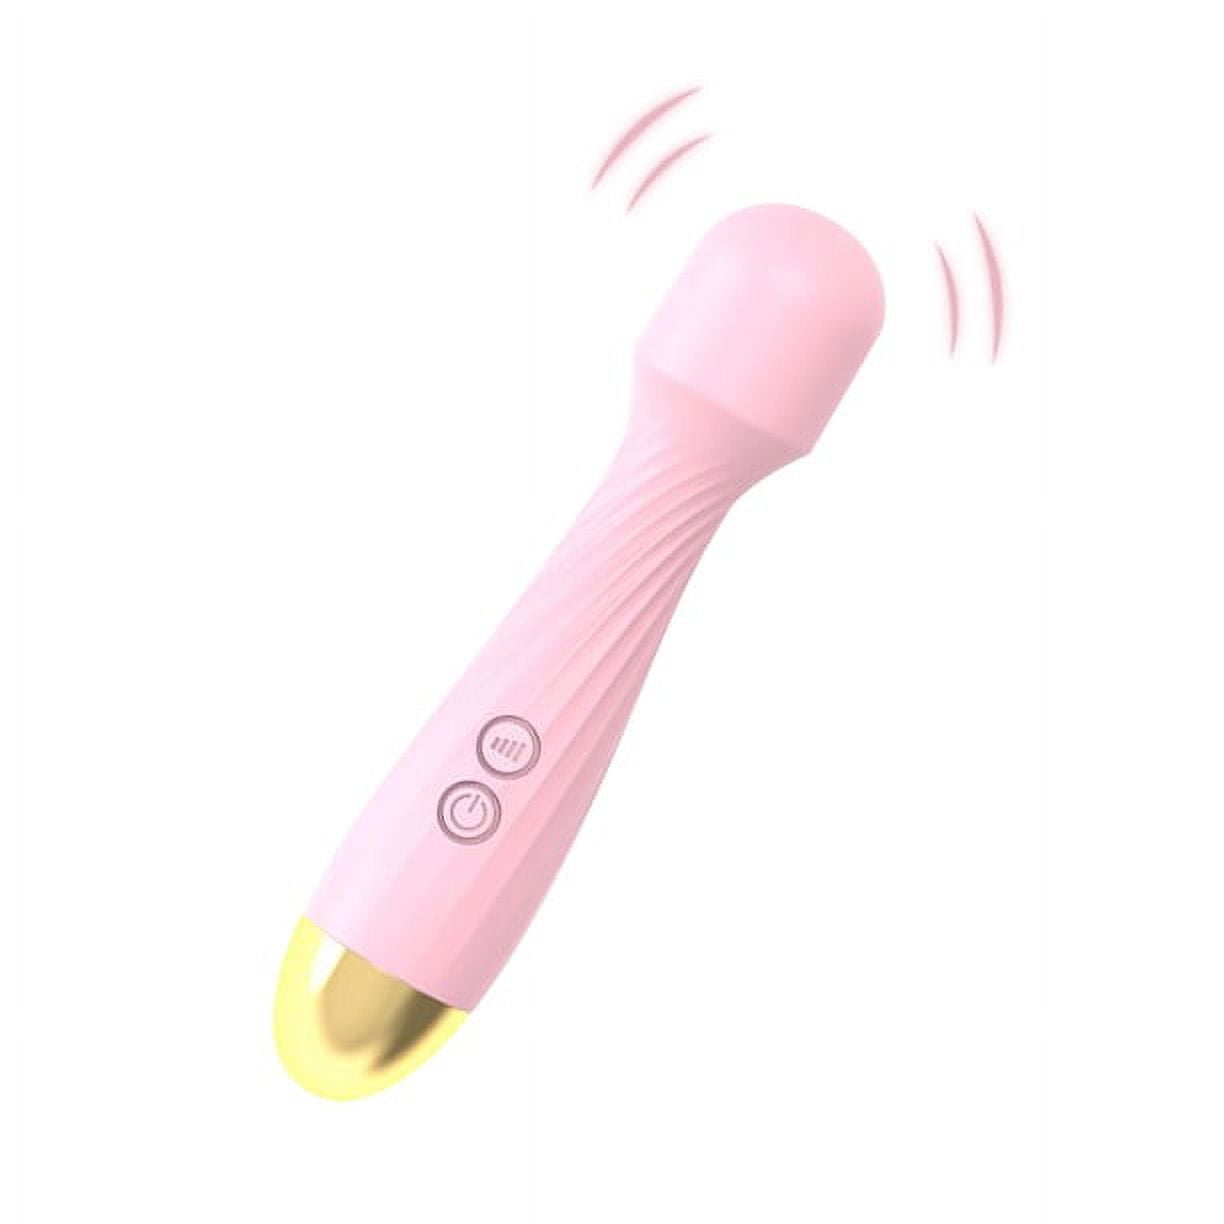 Clitoral Vibrator for Women G Spot Vibrator Wand with 10 Magic Speeds Vibration Modes, Quiet Cordless Electric Personal Wand Massager Sex Toys for Women Vaginal image